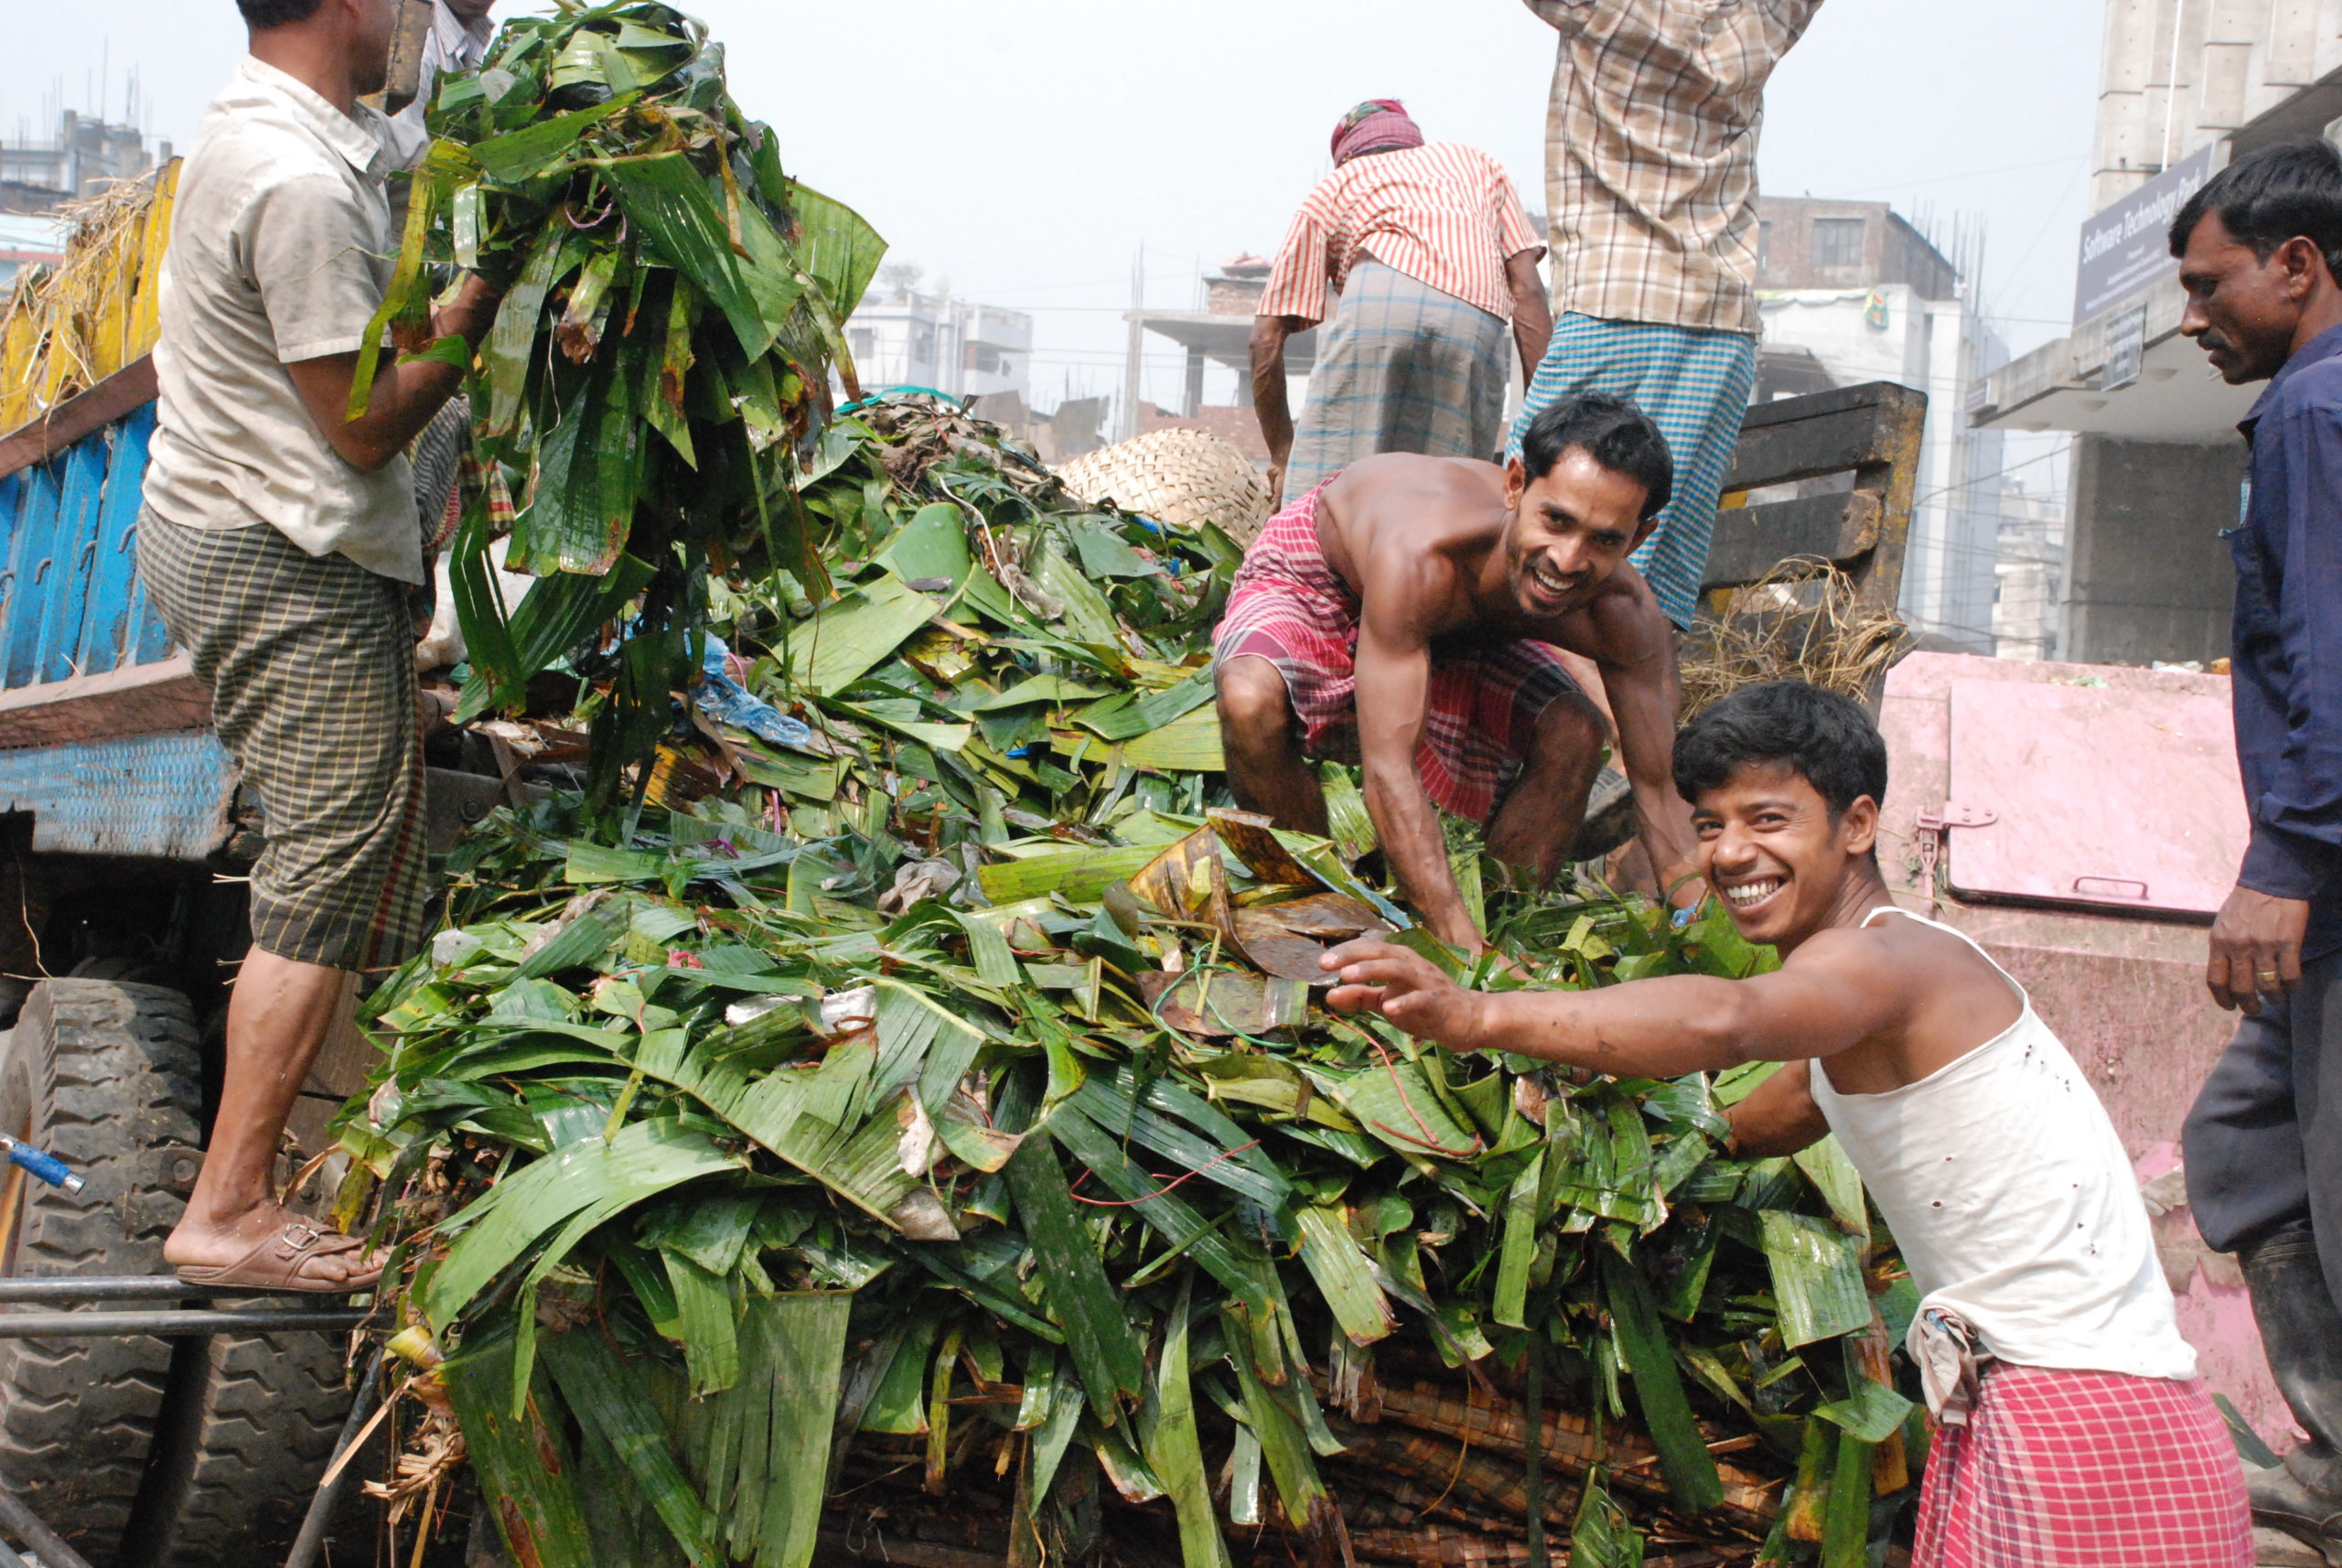 Two farmers unload the back of a truck in Bangladesh. (GAIN)